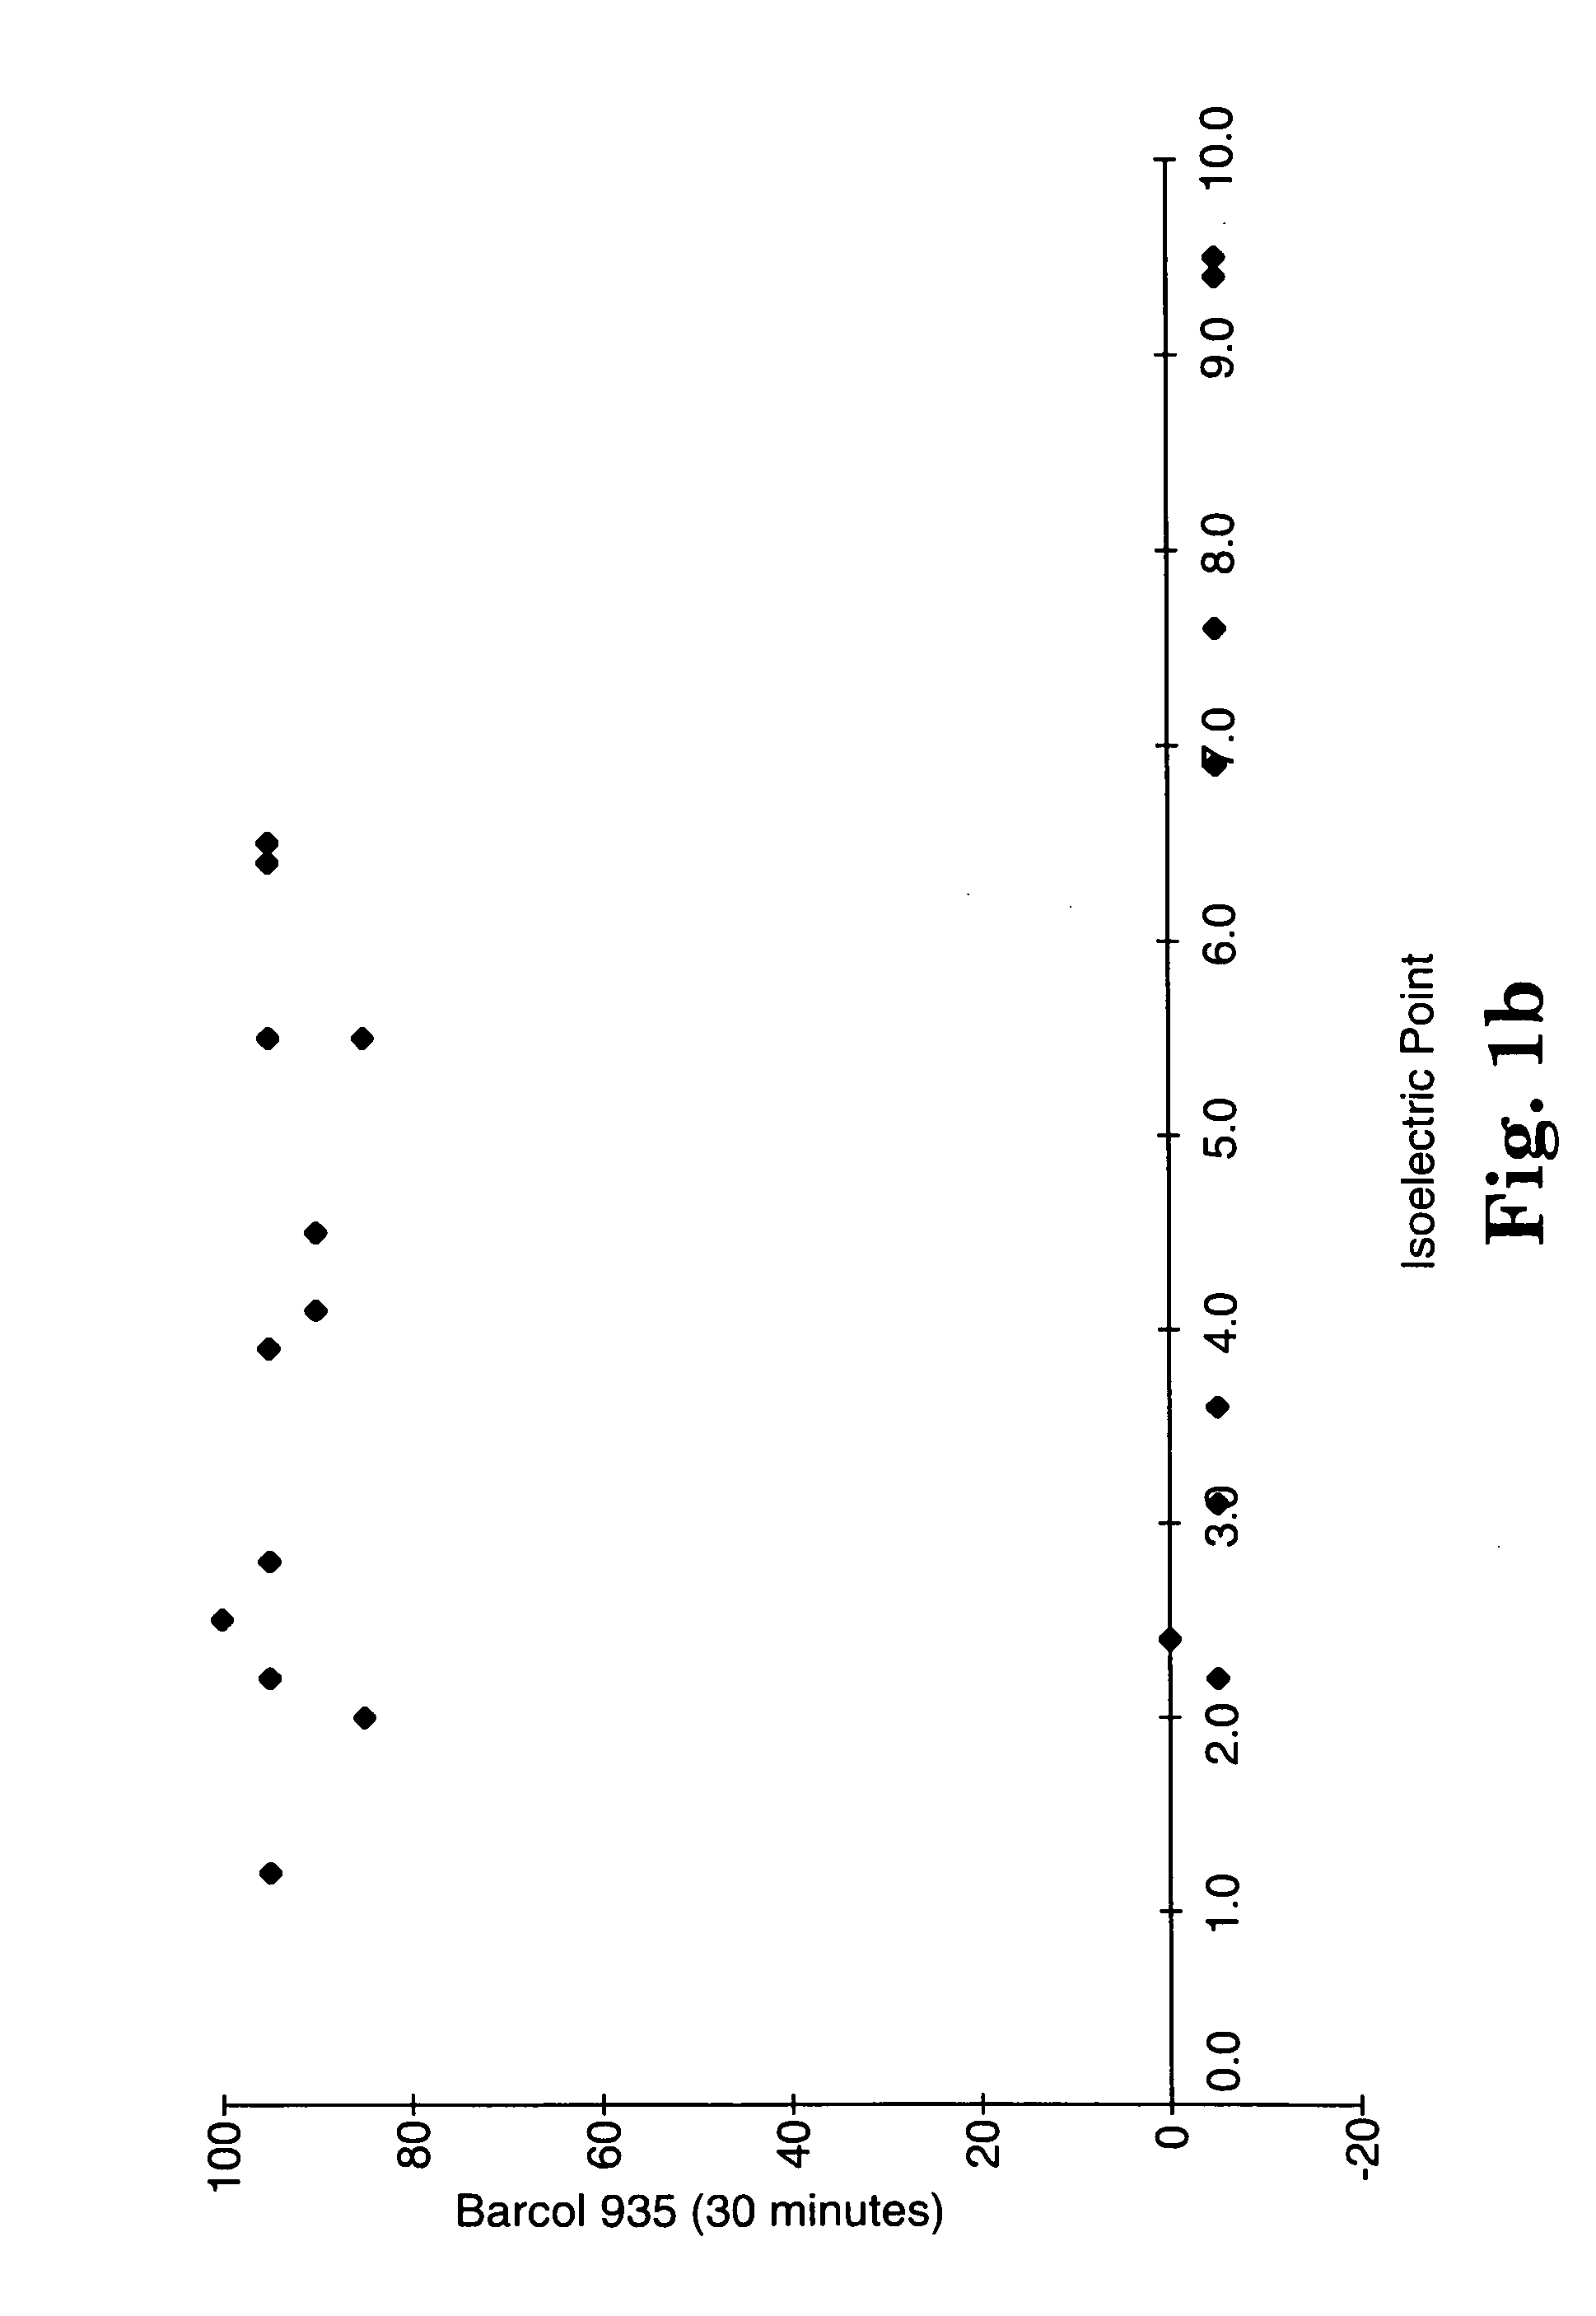 Radiopaque cationically polymerizable compositions comprising a radiopacifying filler, and method for polymerizing same